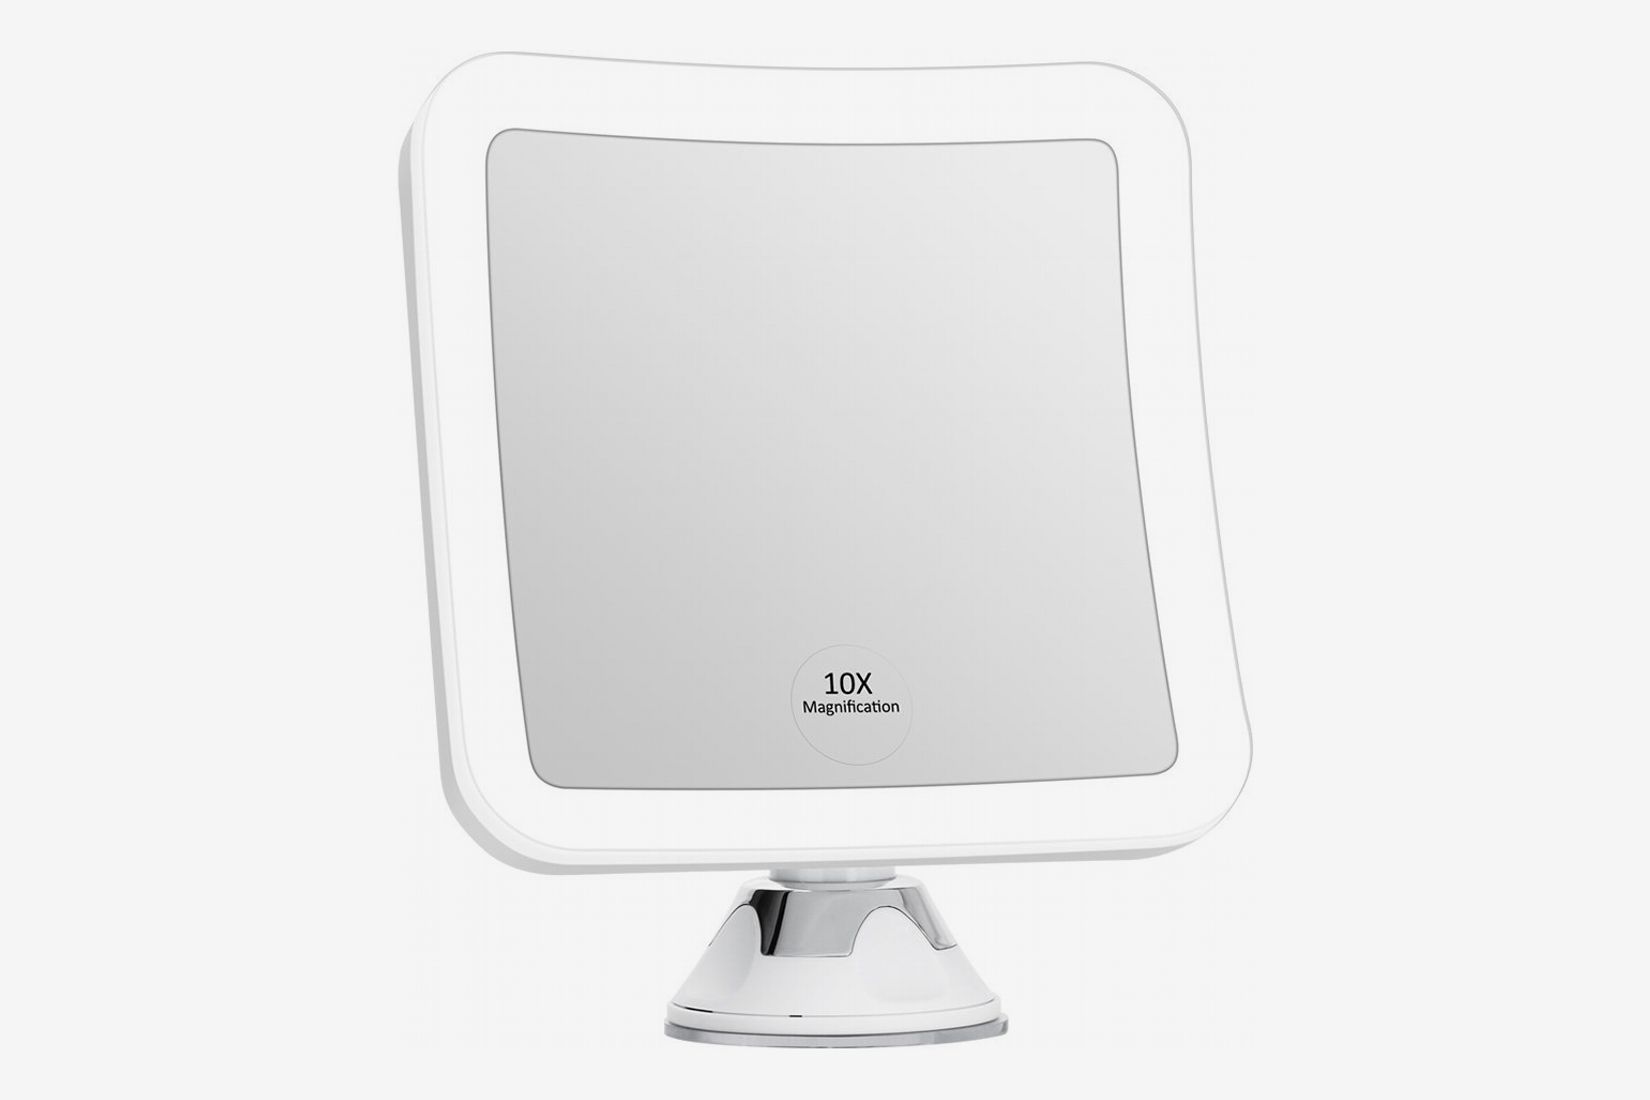 14 Best Lighted Makeup Mirrors 2021, Best Lighted Makeup Mirrors 2021